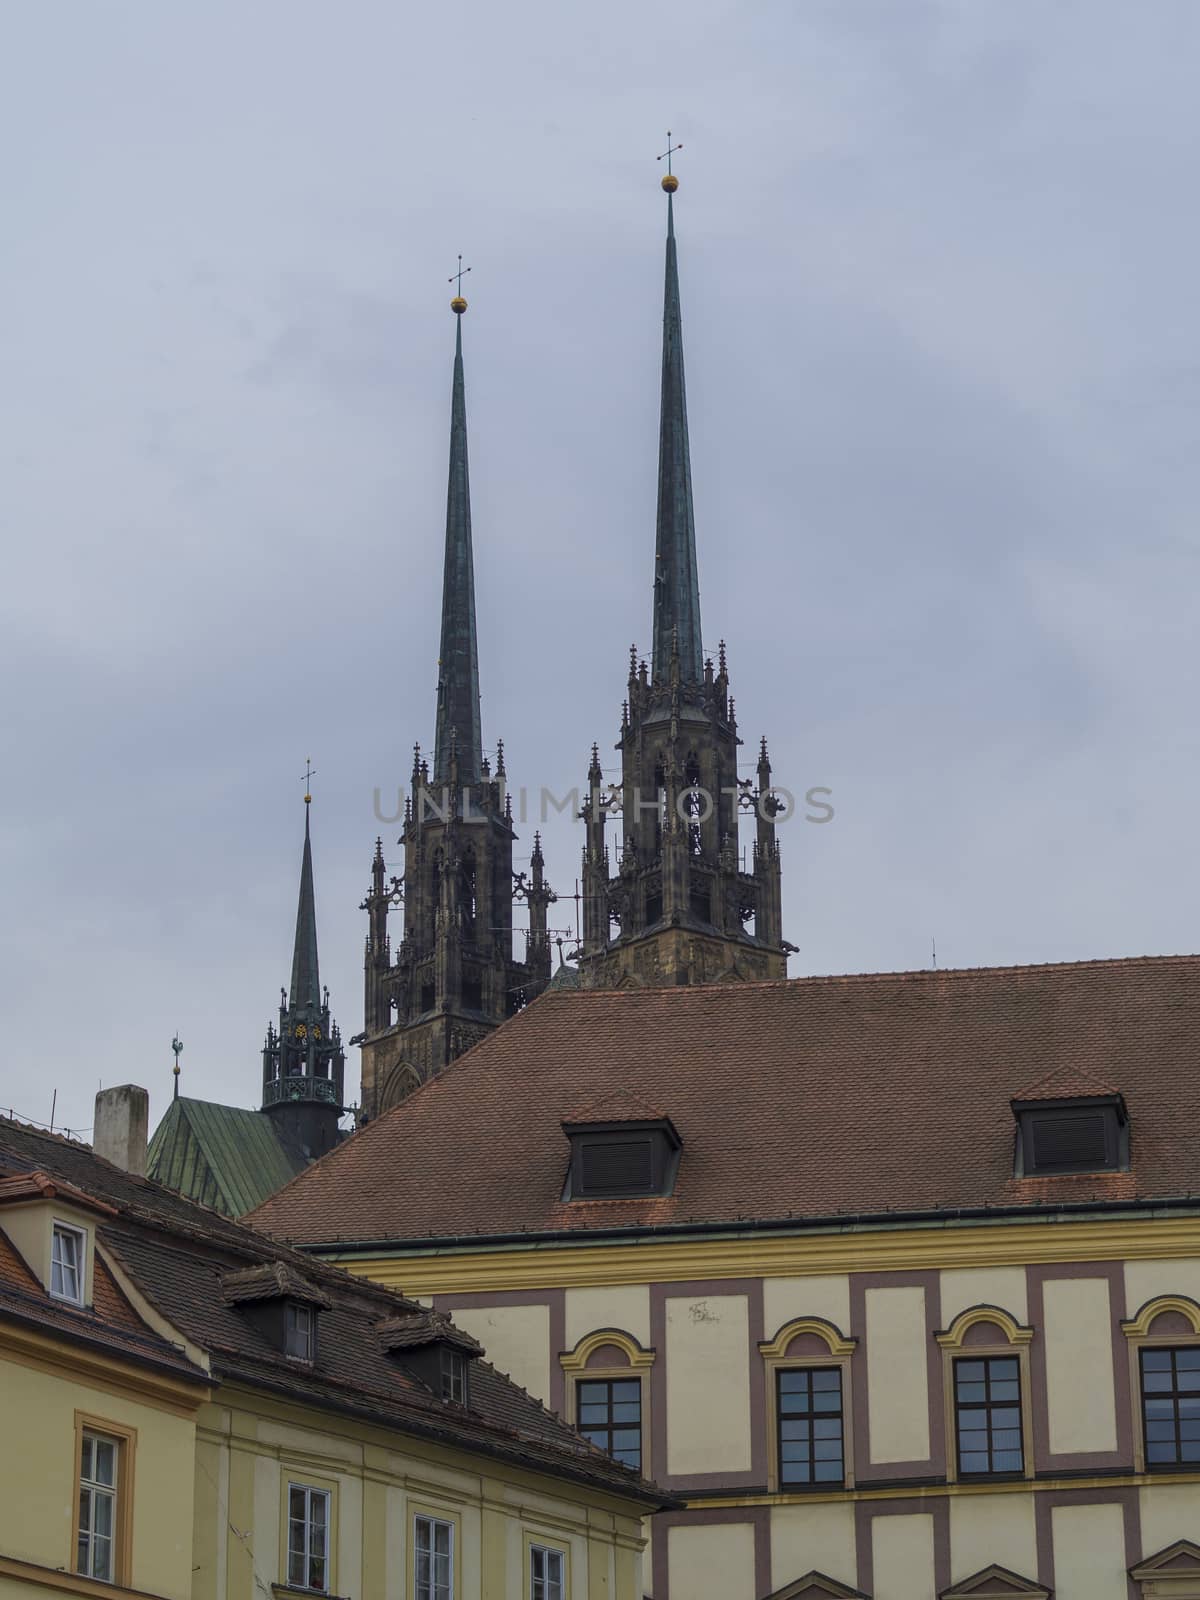 Brno historical city center with towers of gothic cathedral in czech republic